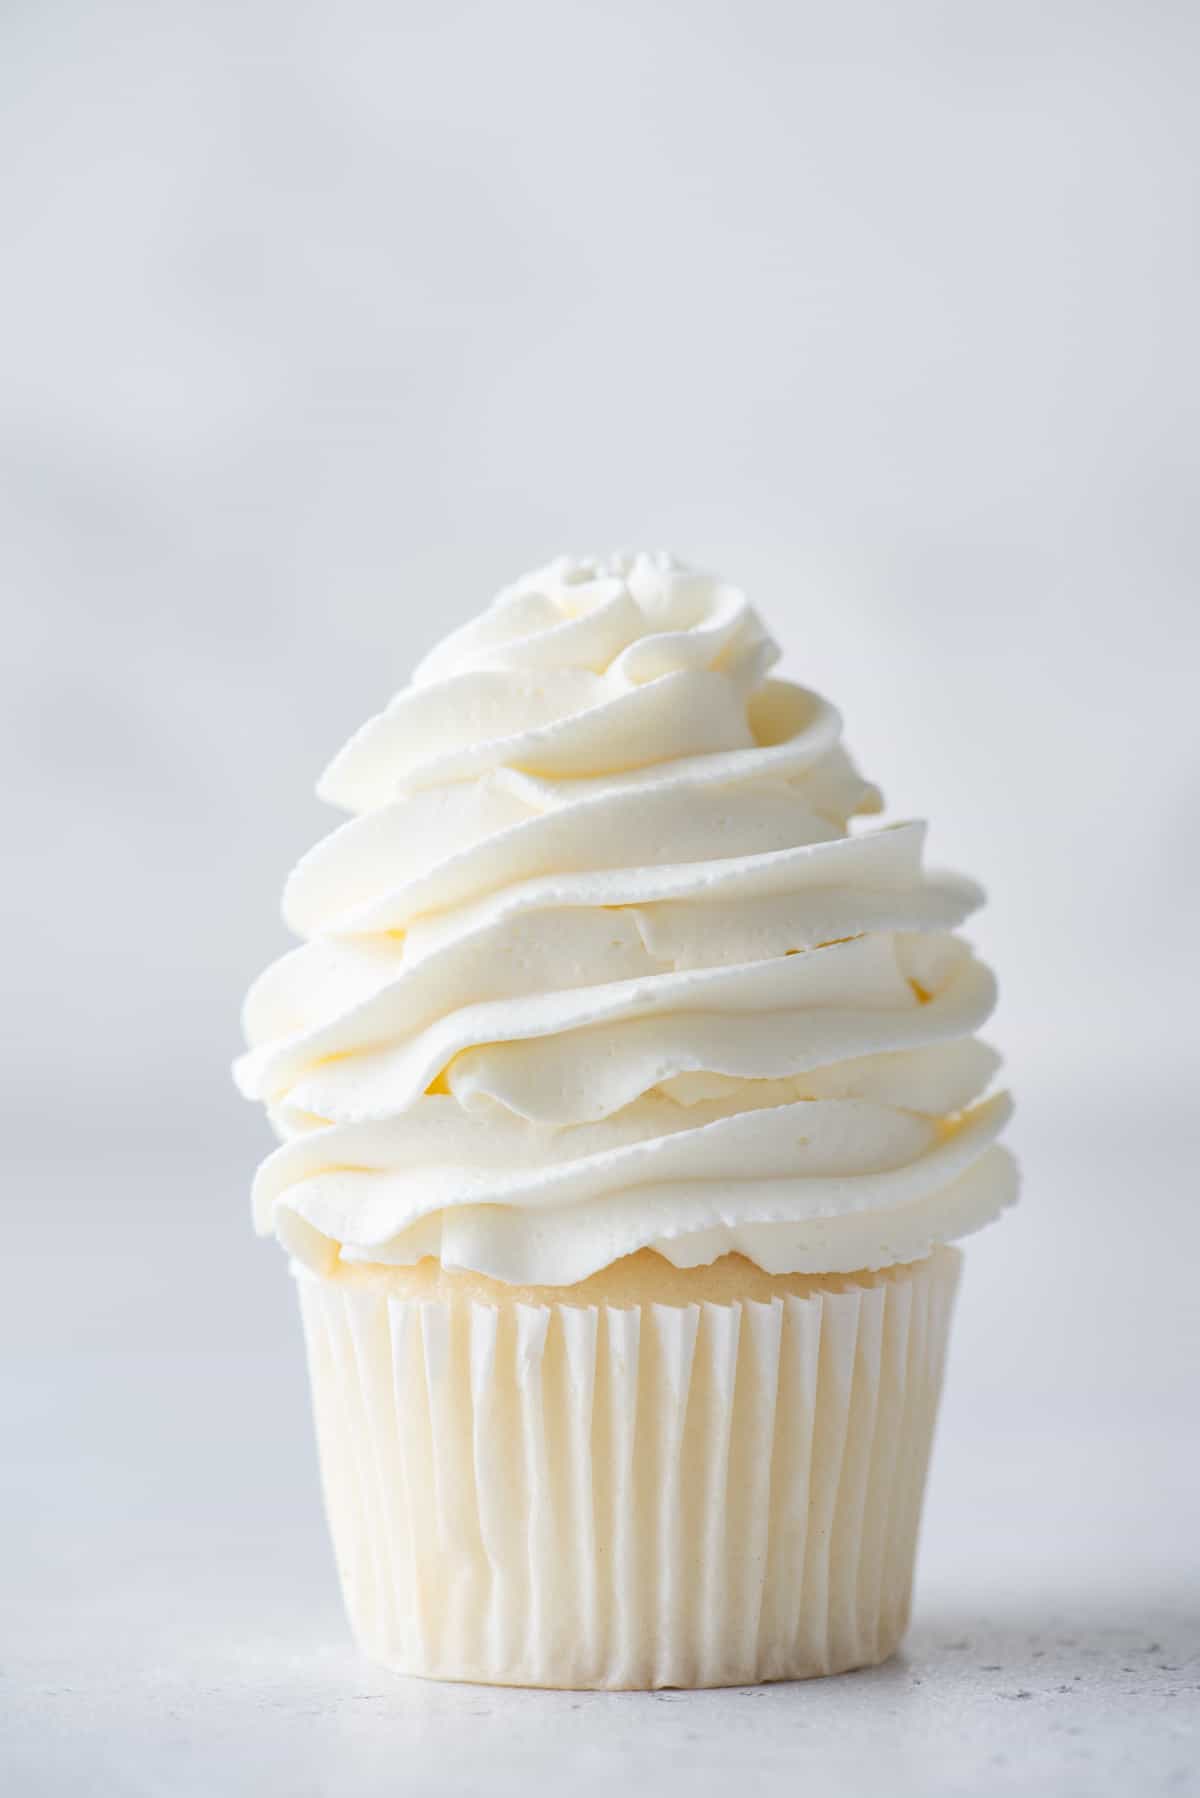 stabilized whipped cream piped on top of a vanilla cupcake